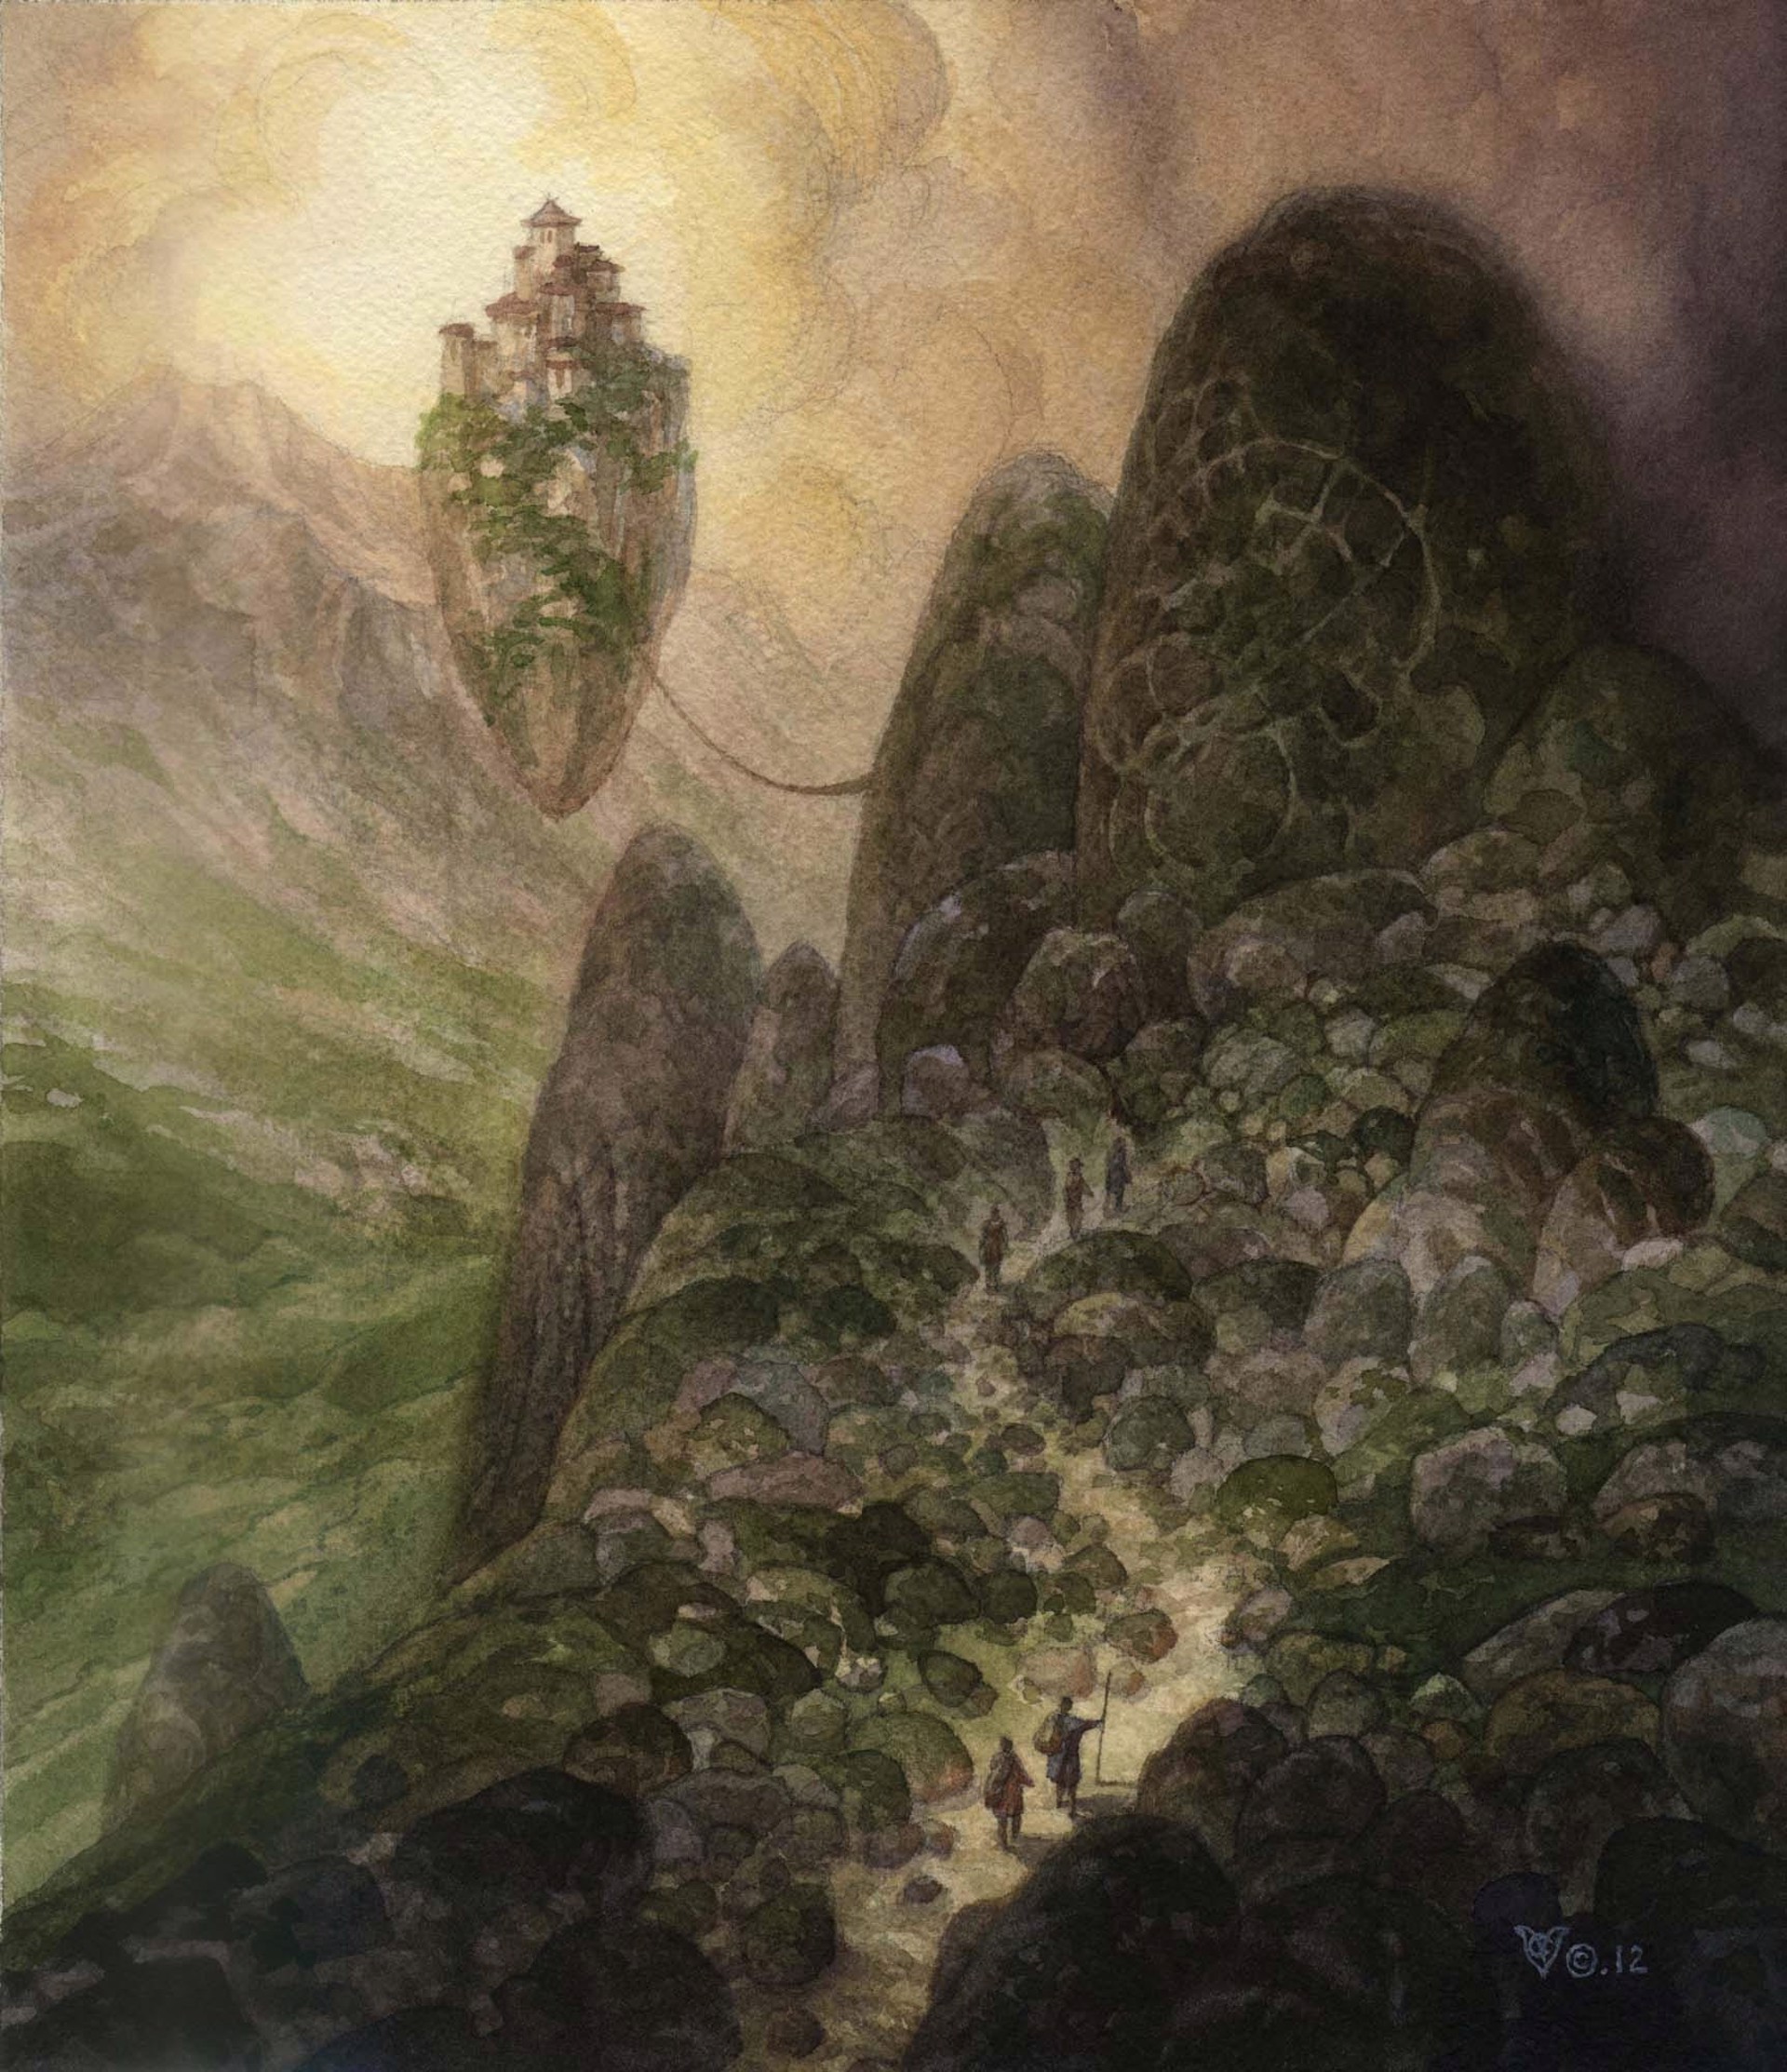 Pilgrimage to Khoon Lam by Christophe Vacher